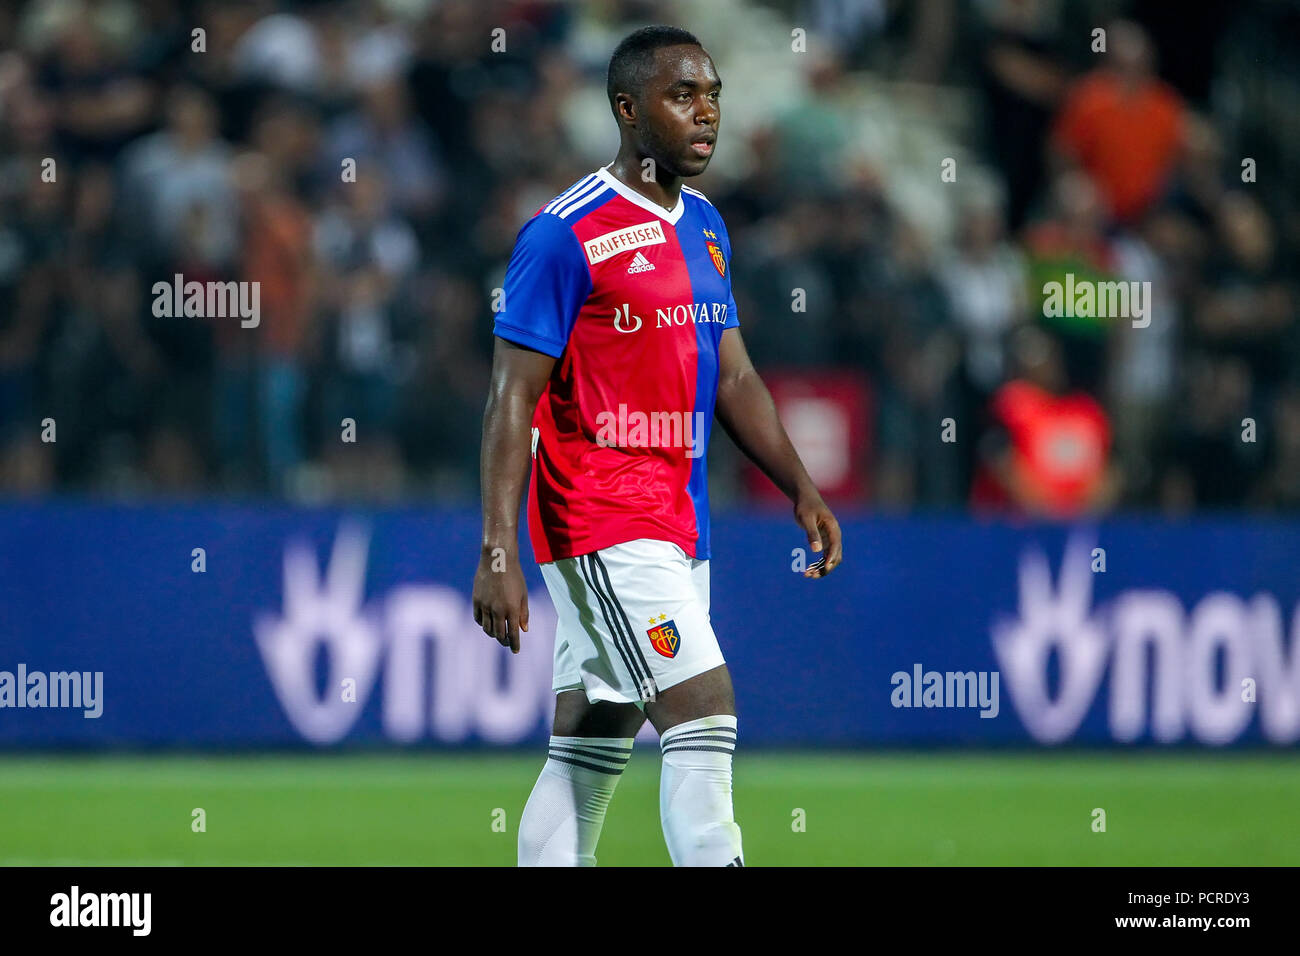 Thessaloniki, Greece - July 24, 2018: Player of Basel Eder Balanta in action during the UEFA Champions League Second qualifying round , 1st  match bet Stock Photo